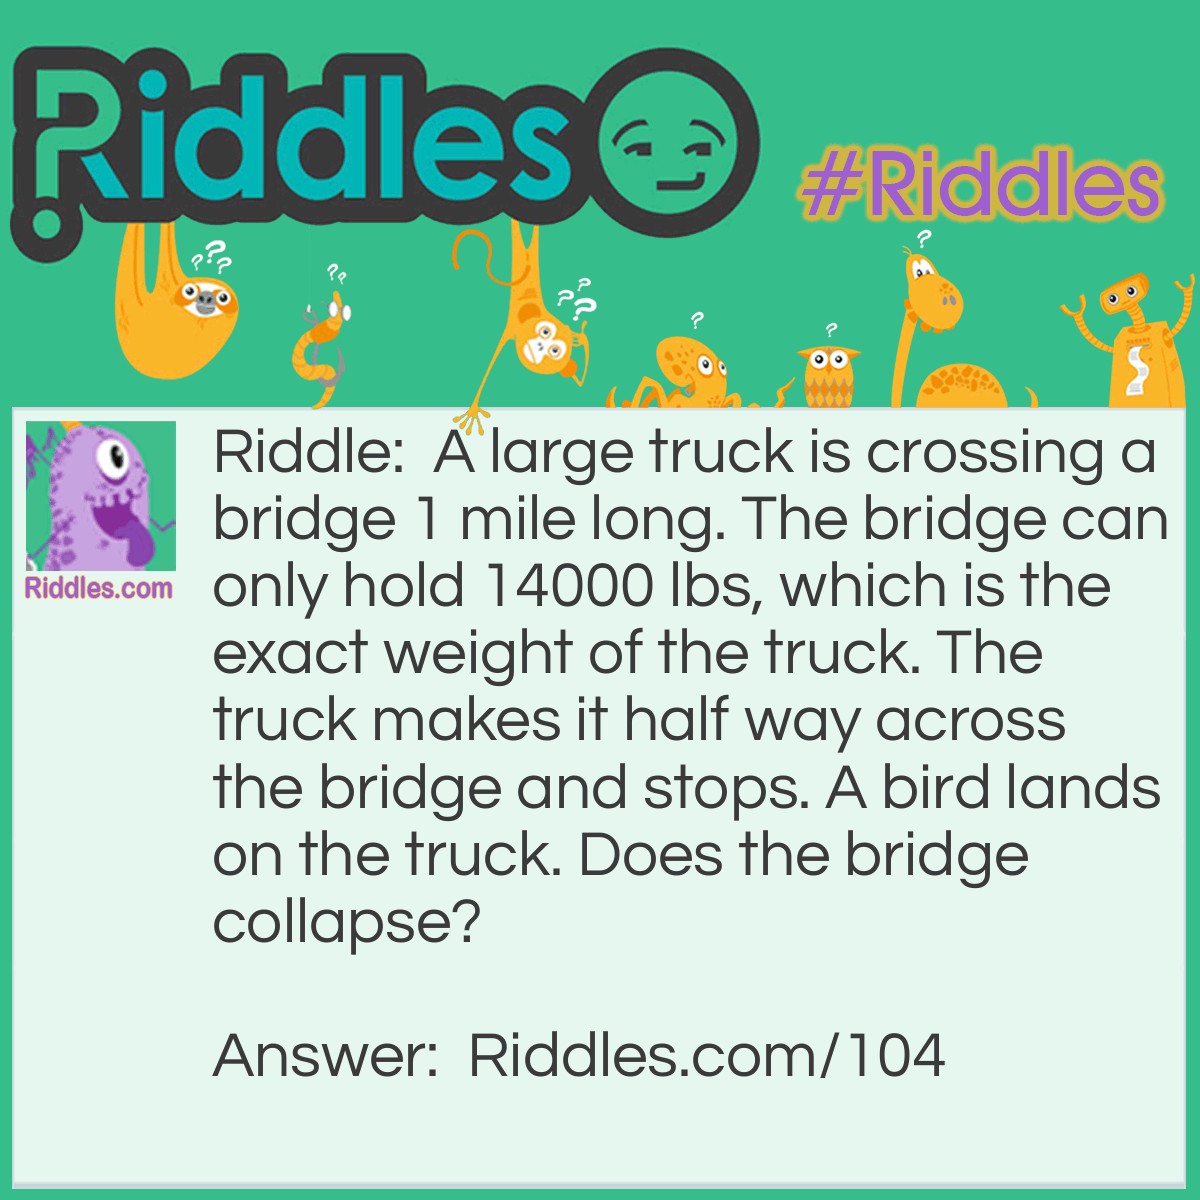 Riddle: A large truck is crossing a bridge 1 mile long. The bridge can only hold 14000 lbs, which is the exact weight of the truck. The truck makes it half way across the bridge and stops. A bird lands on the truck. Does the bridge collapse? Answer: No, it does not collapse. Because it has driven a half mile - you would subtract the gas used from the total weight of the truck.